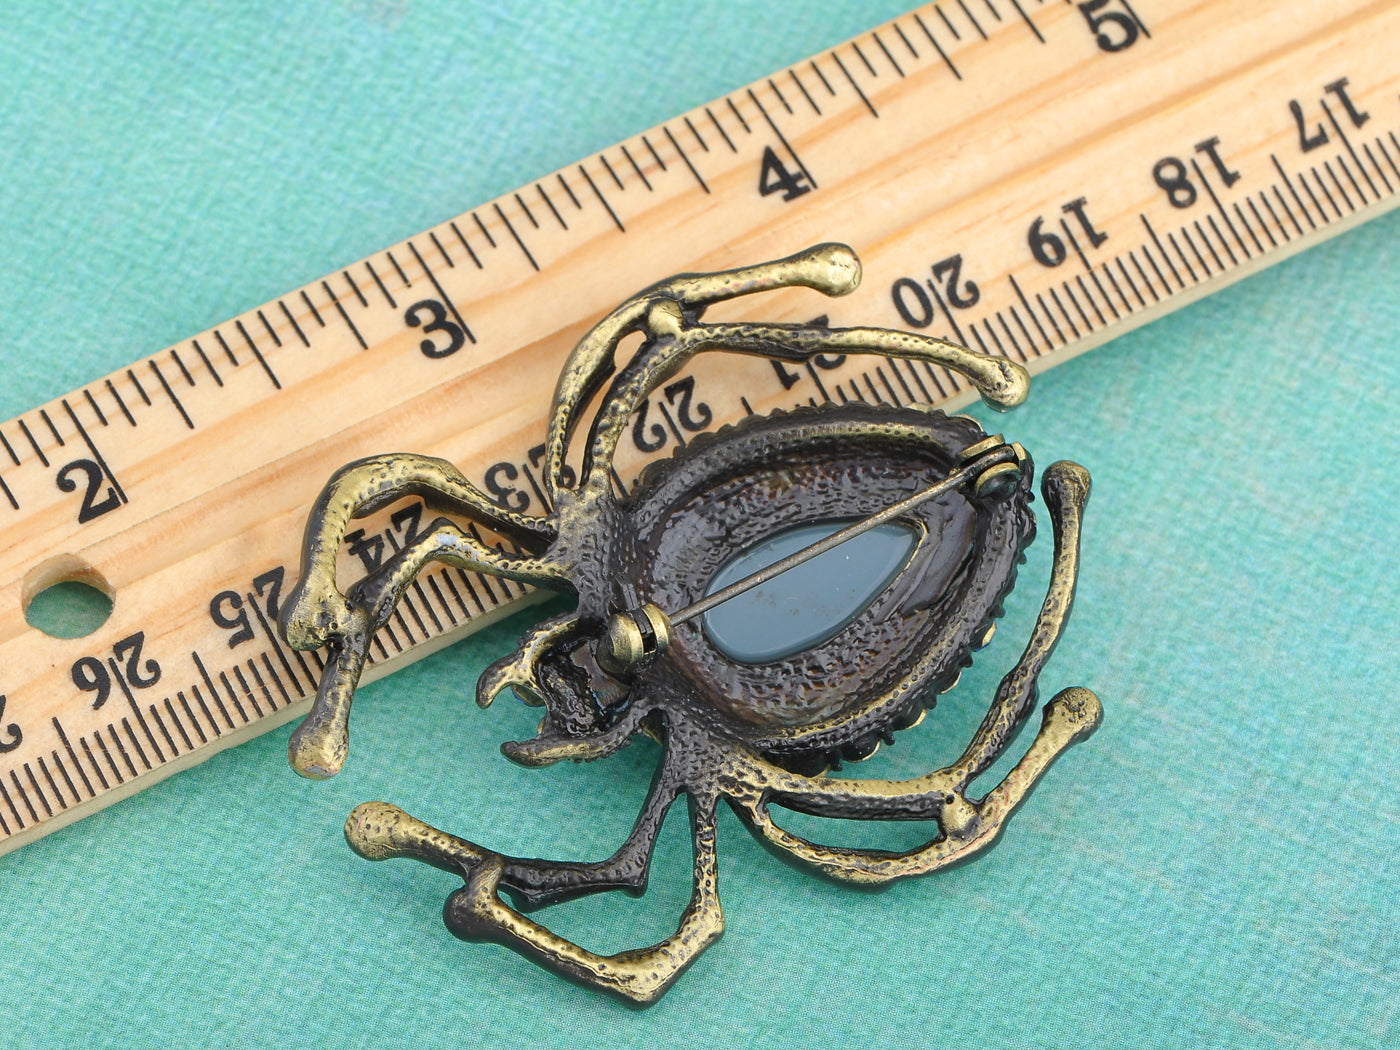 Antique Big Teardrop Sapphire Blue Spider Insect Brooch Pin